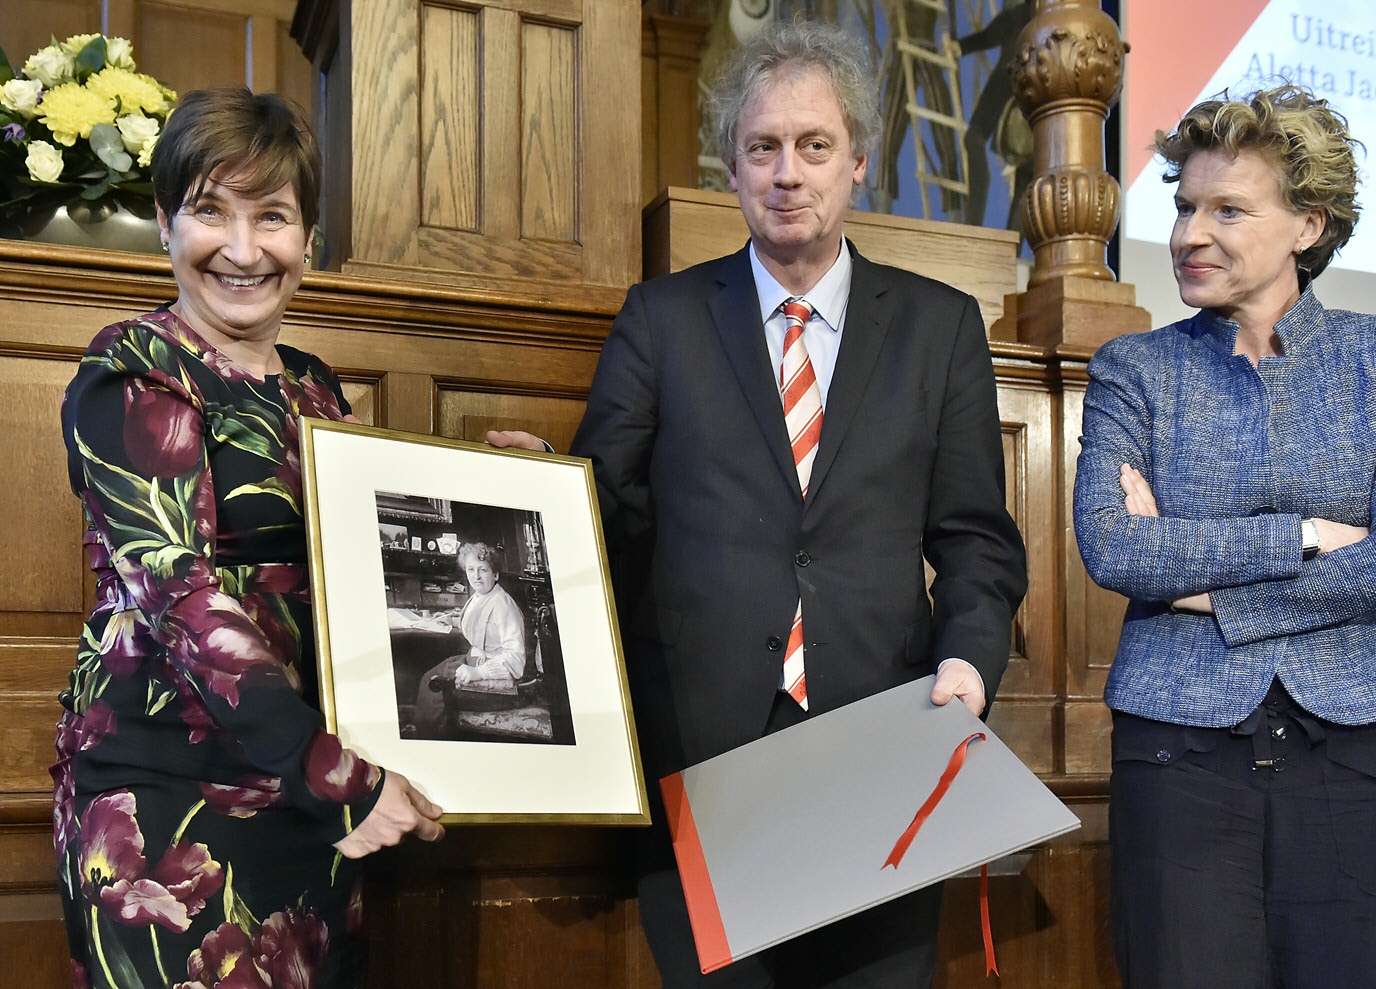 Lilianne Ploumen being presented with a picture of Aletta Jacobs by Prof. Elmer Sterken (Rector Magnificus) and Prof. Janka Stoker (Chair of the Aletta Jacobs Prize Jury and Professor of Leadership and Organizational Change, Faculty of Economics and Business)